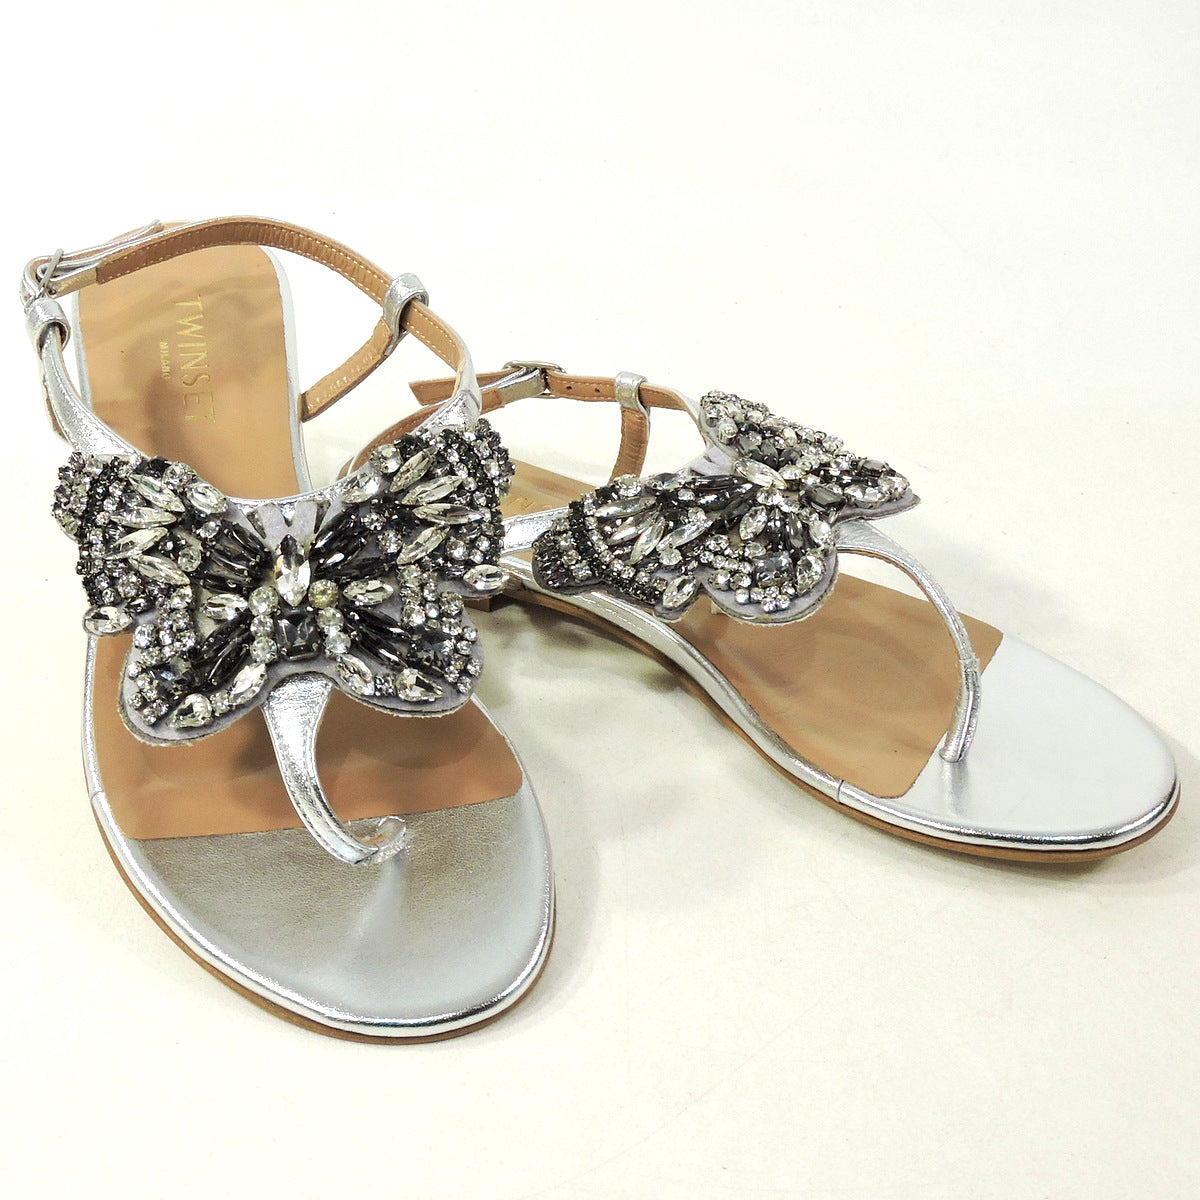 TWINSET 🇮🇹 WOMEN'S SILVER LEATHER COMFORT FLAT SUMMER SANDALS